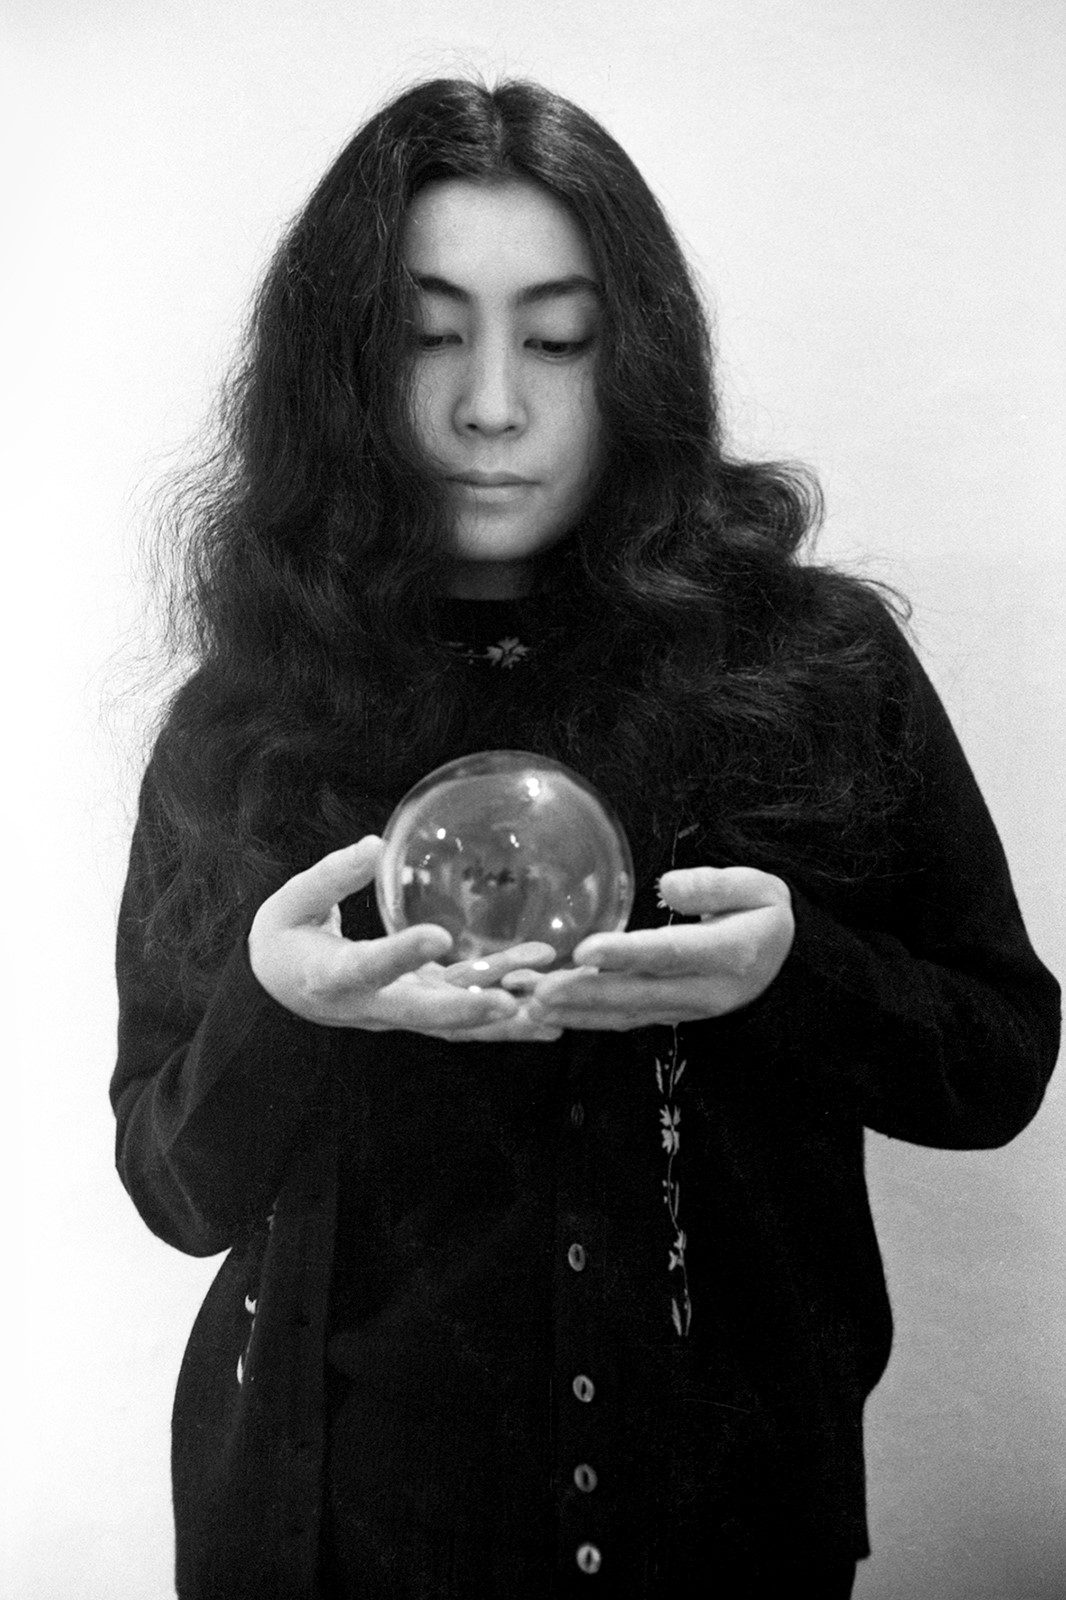 Clay Perry, Yoko Ono (with glass sphere), [Detail], 1967/2020. Courtesy of England & Co